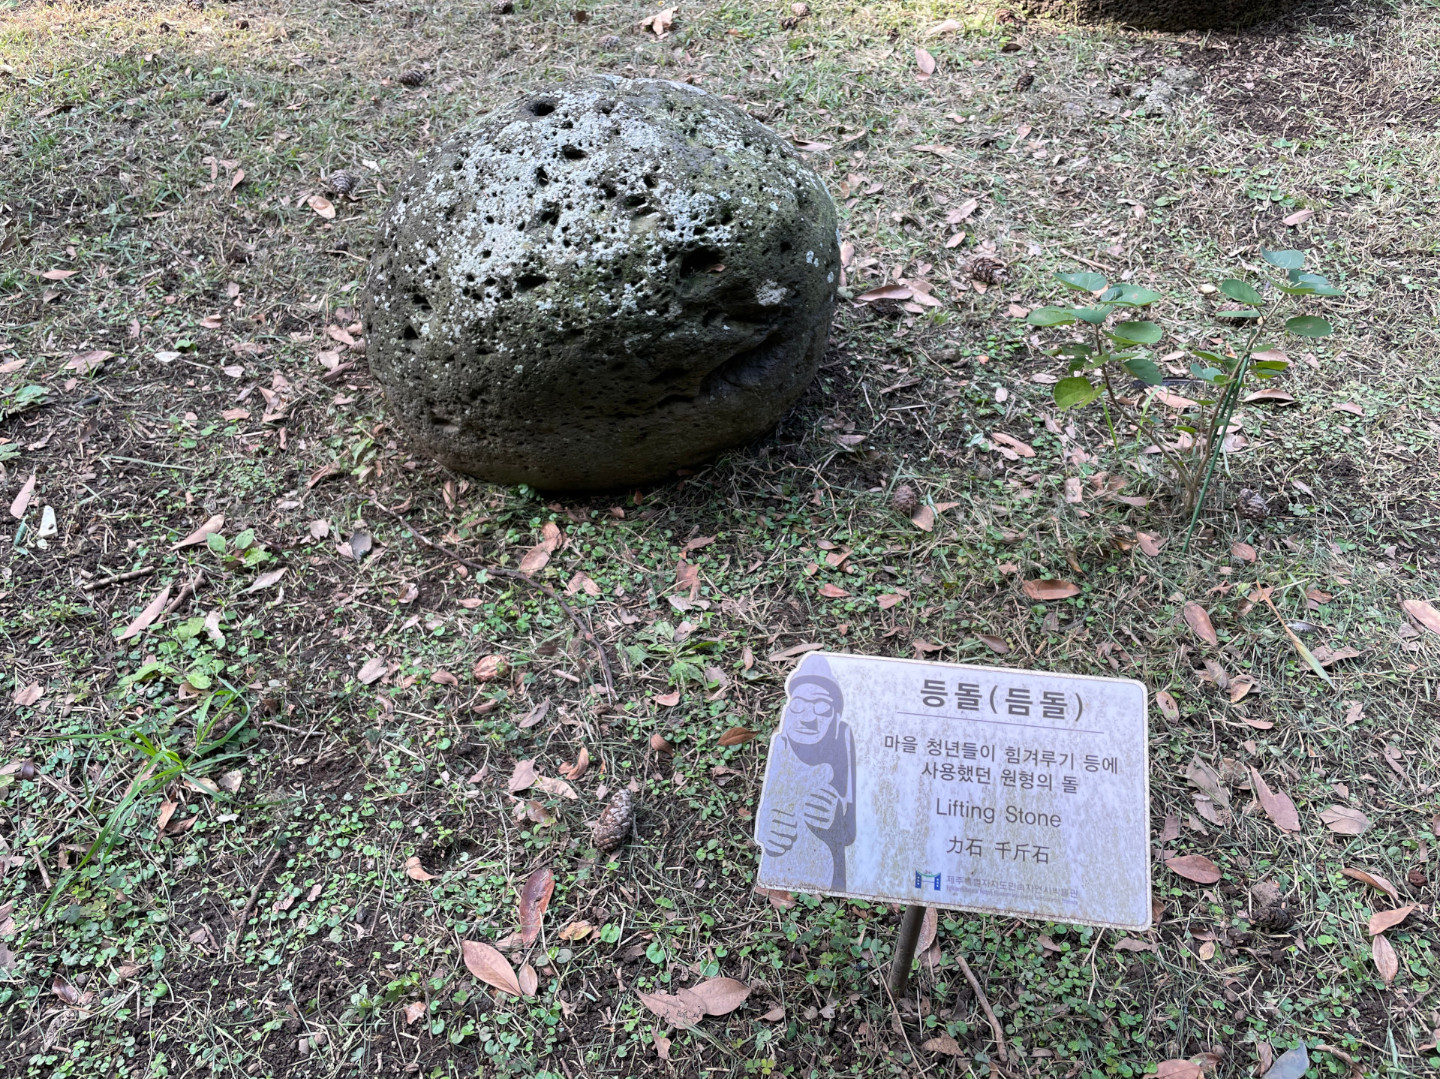 A lifting stone at Jeju Folklore and Natural History Museum